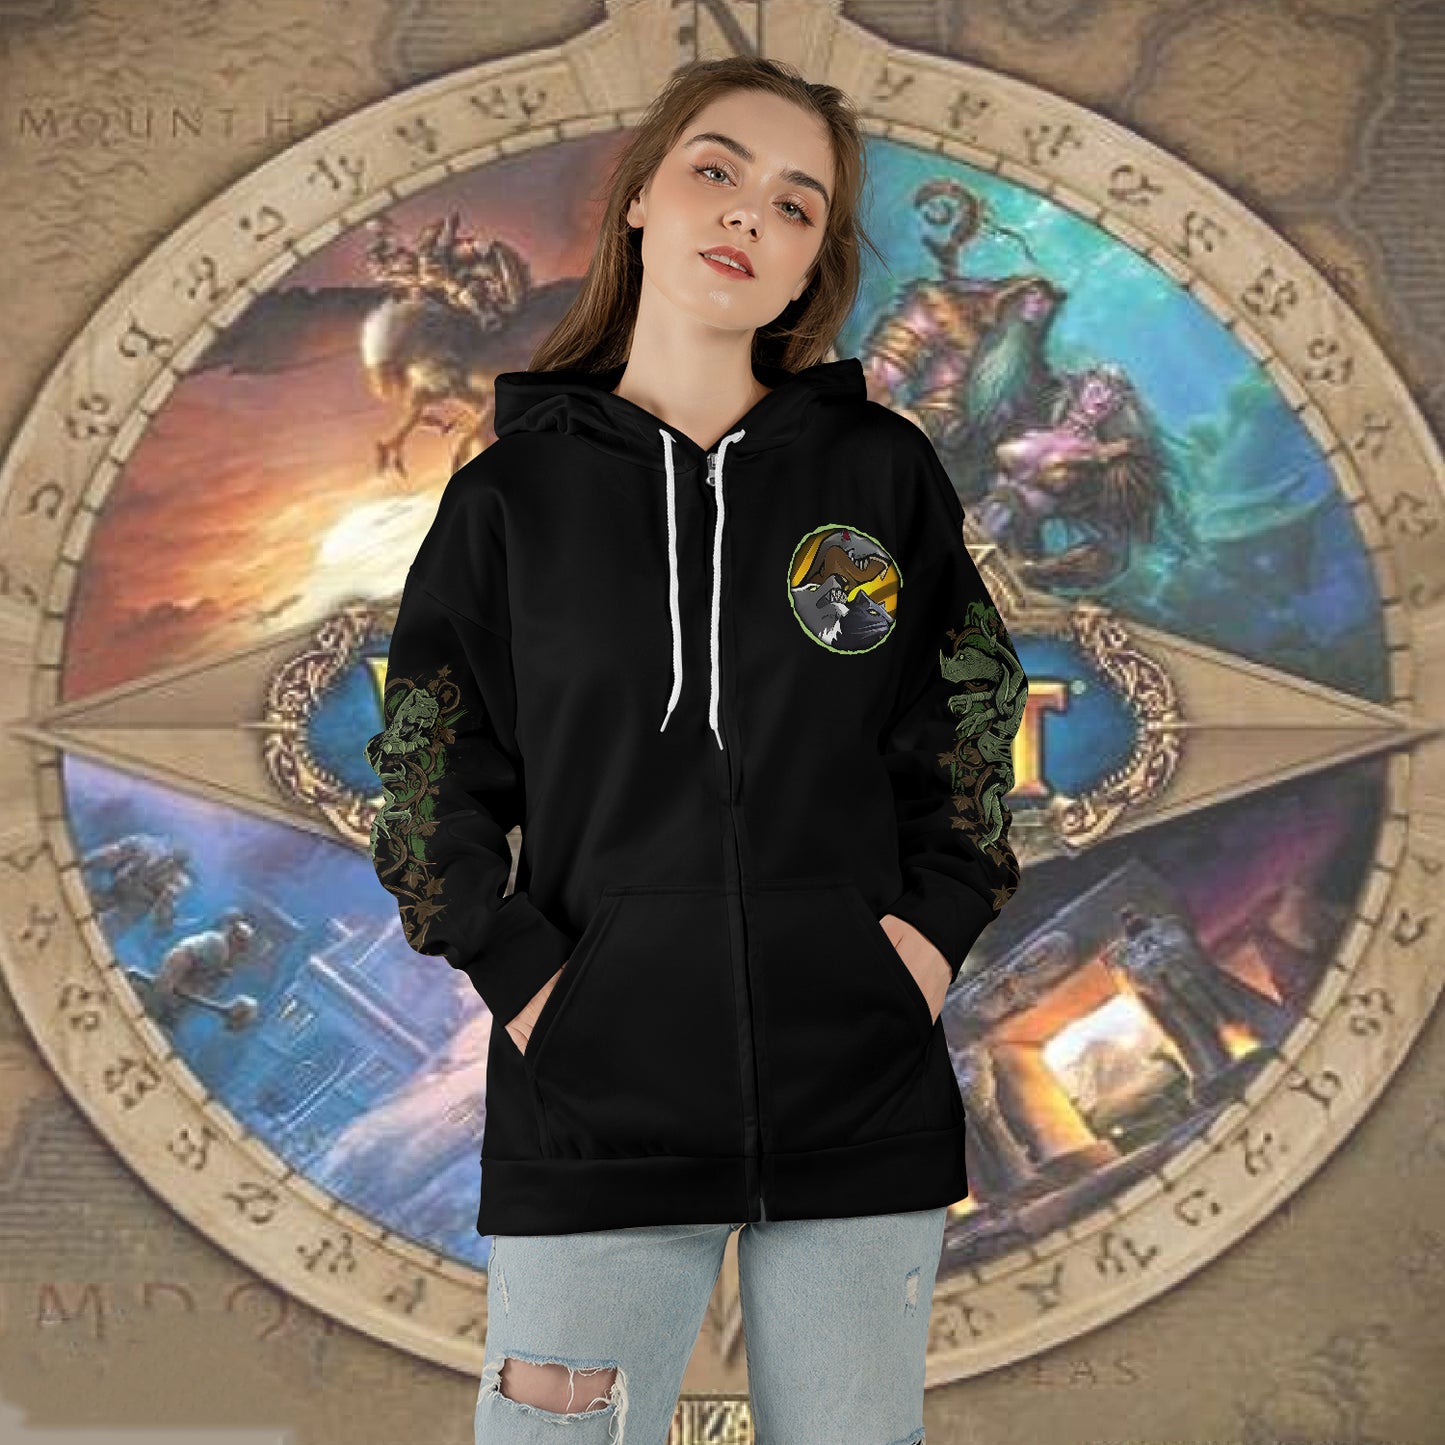 WoW Class Beast Mastery Hunter Guide V1 All-over Print Zip Hoodie